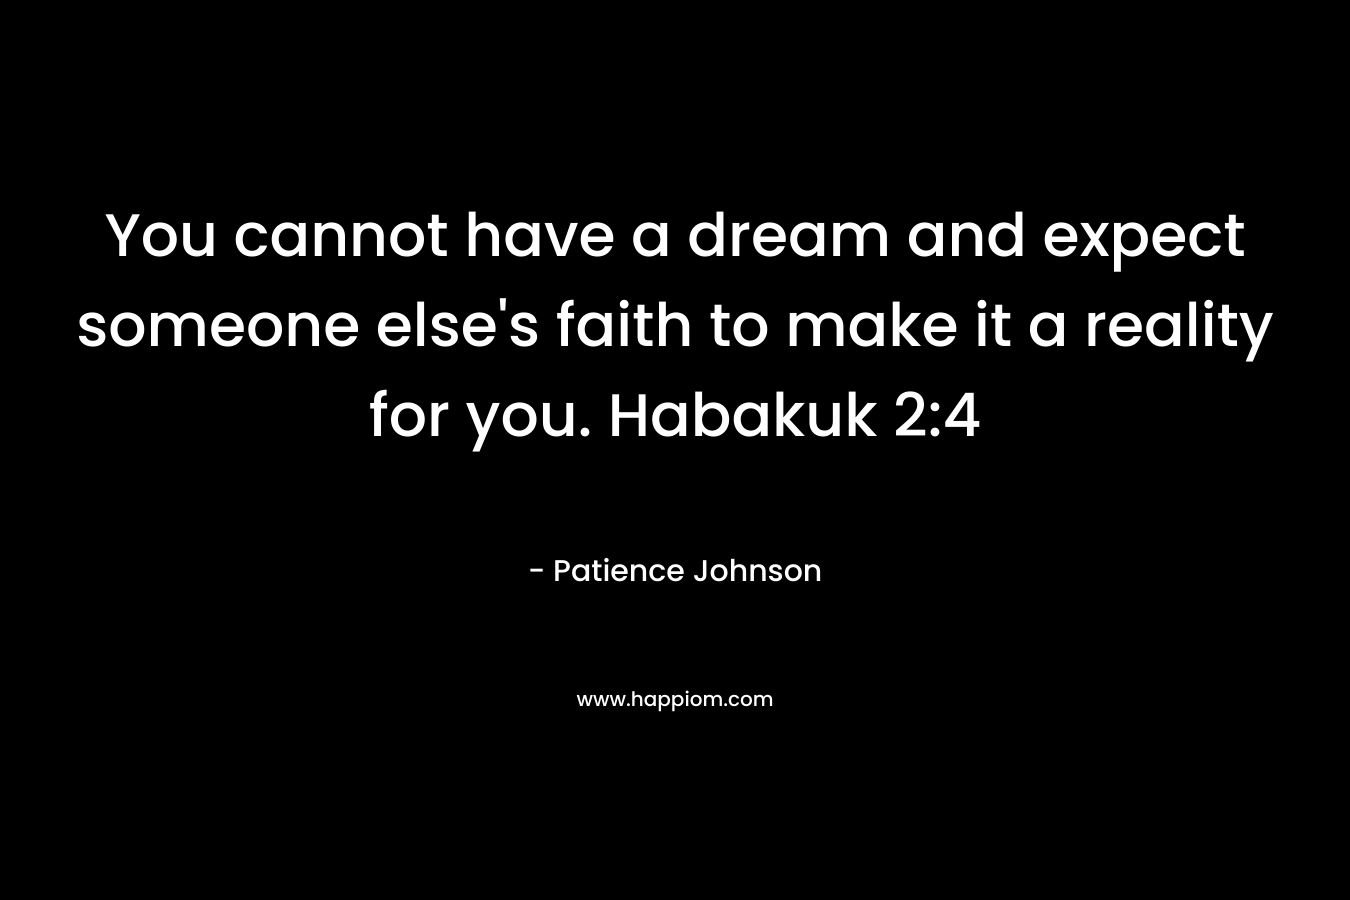 You cannot have a dream and expect someone else’s faith to make it a reality for you. Habakuk 2:4 – Patience Johnson